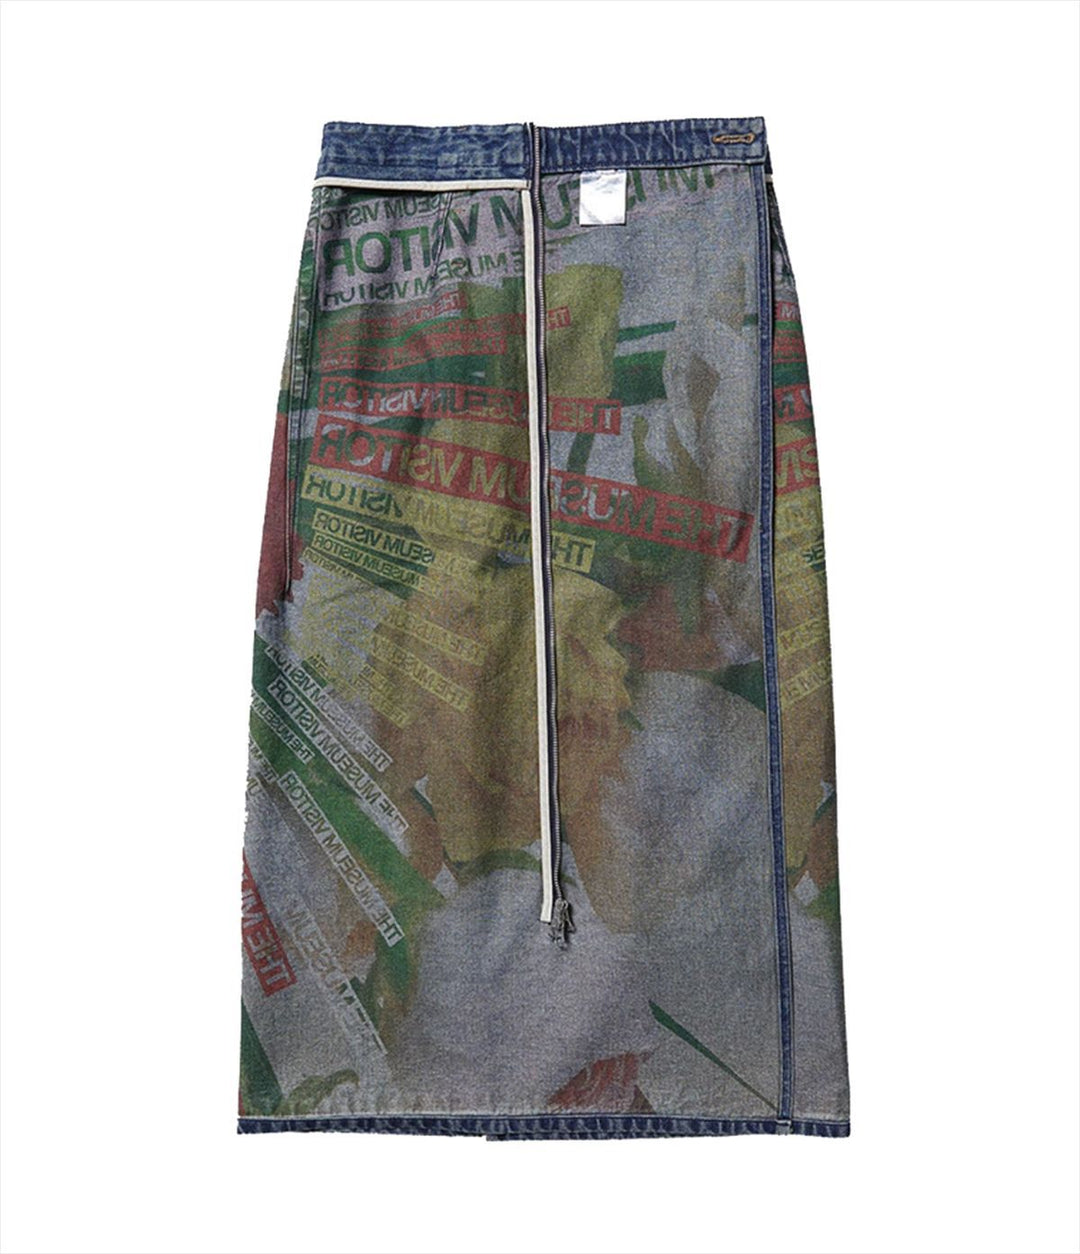 Stomach Blanket Double Sided Wear Art Design Printing Washed Do the Old Cowboy Zipper Stitching Straight Long Skirt